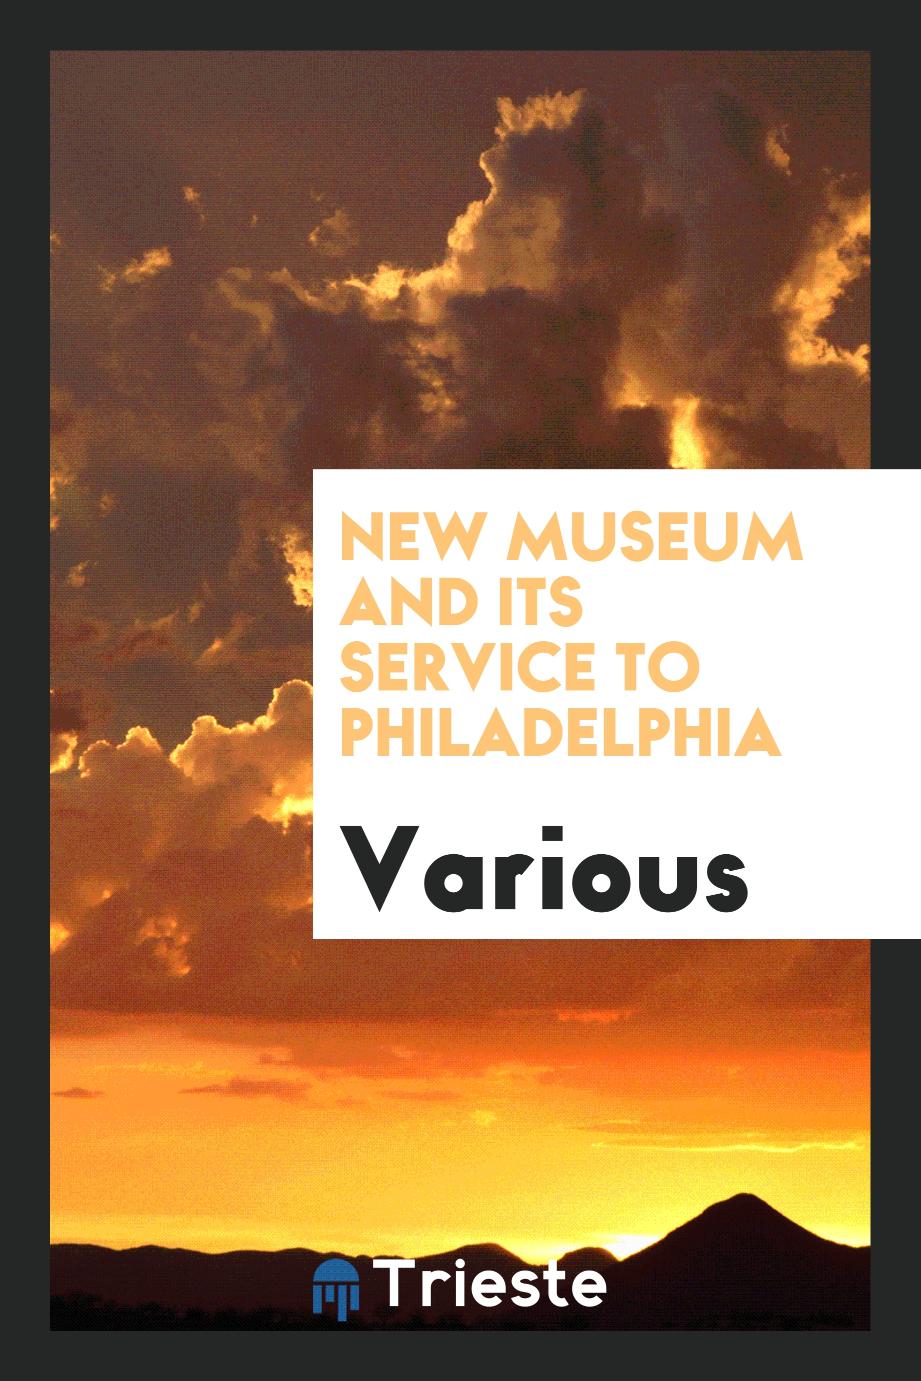 New Museum and Its Service to Philadelphia